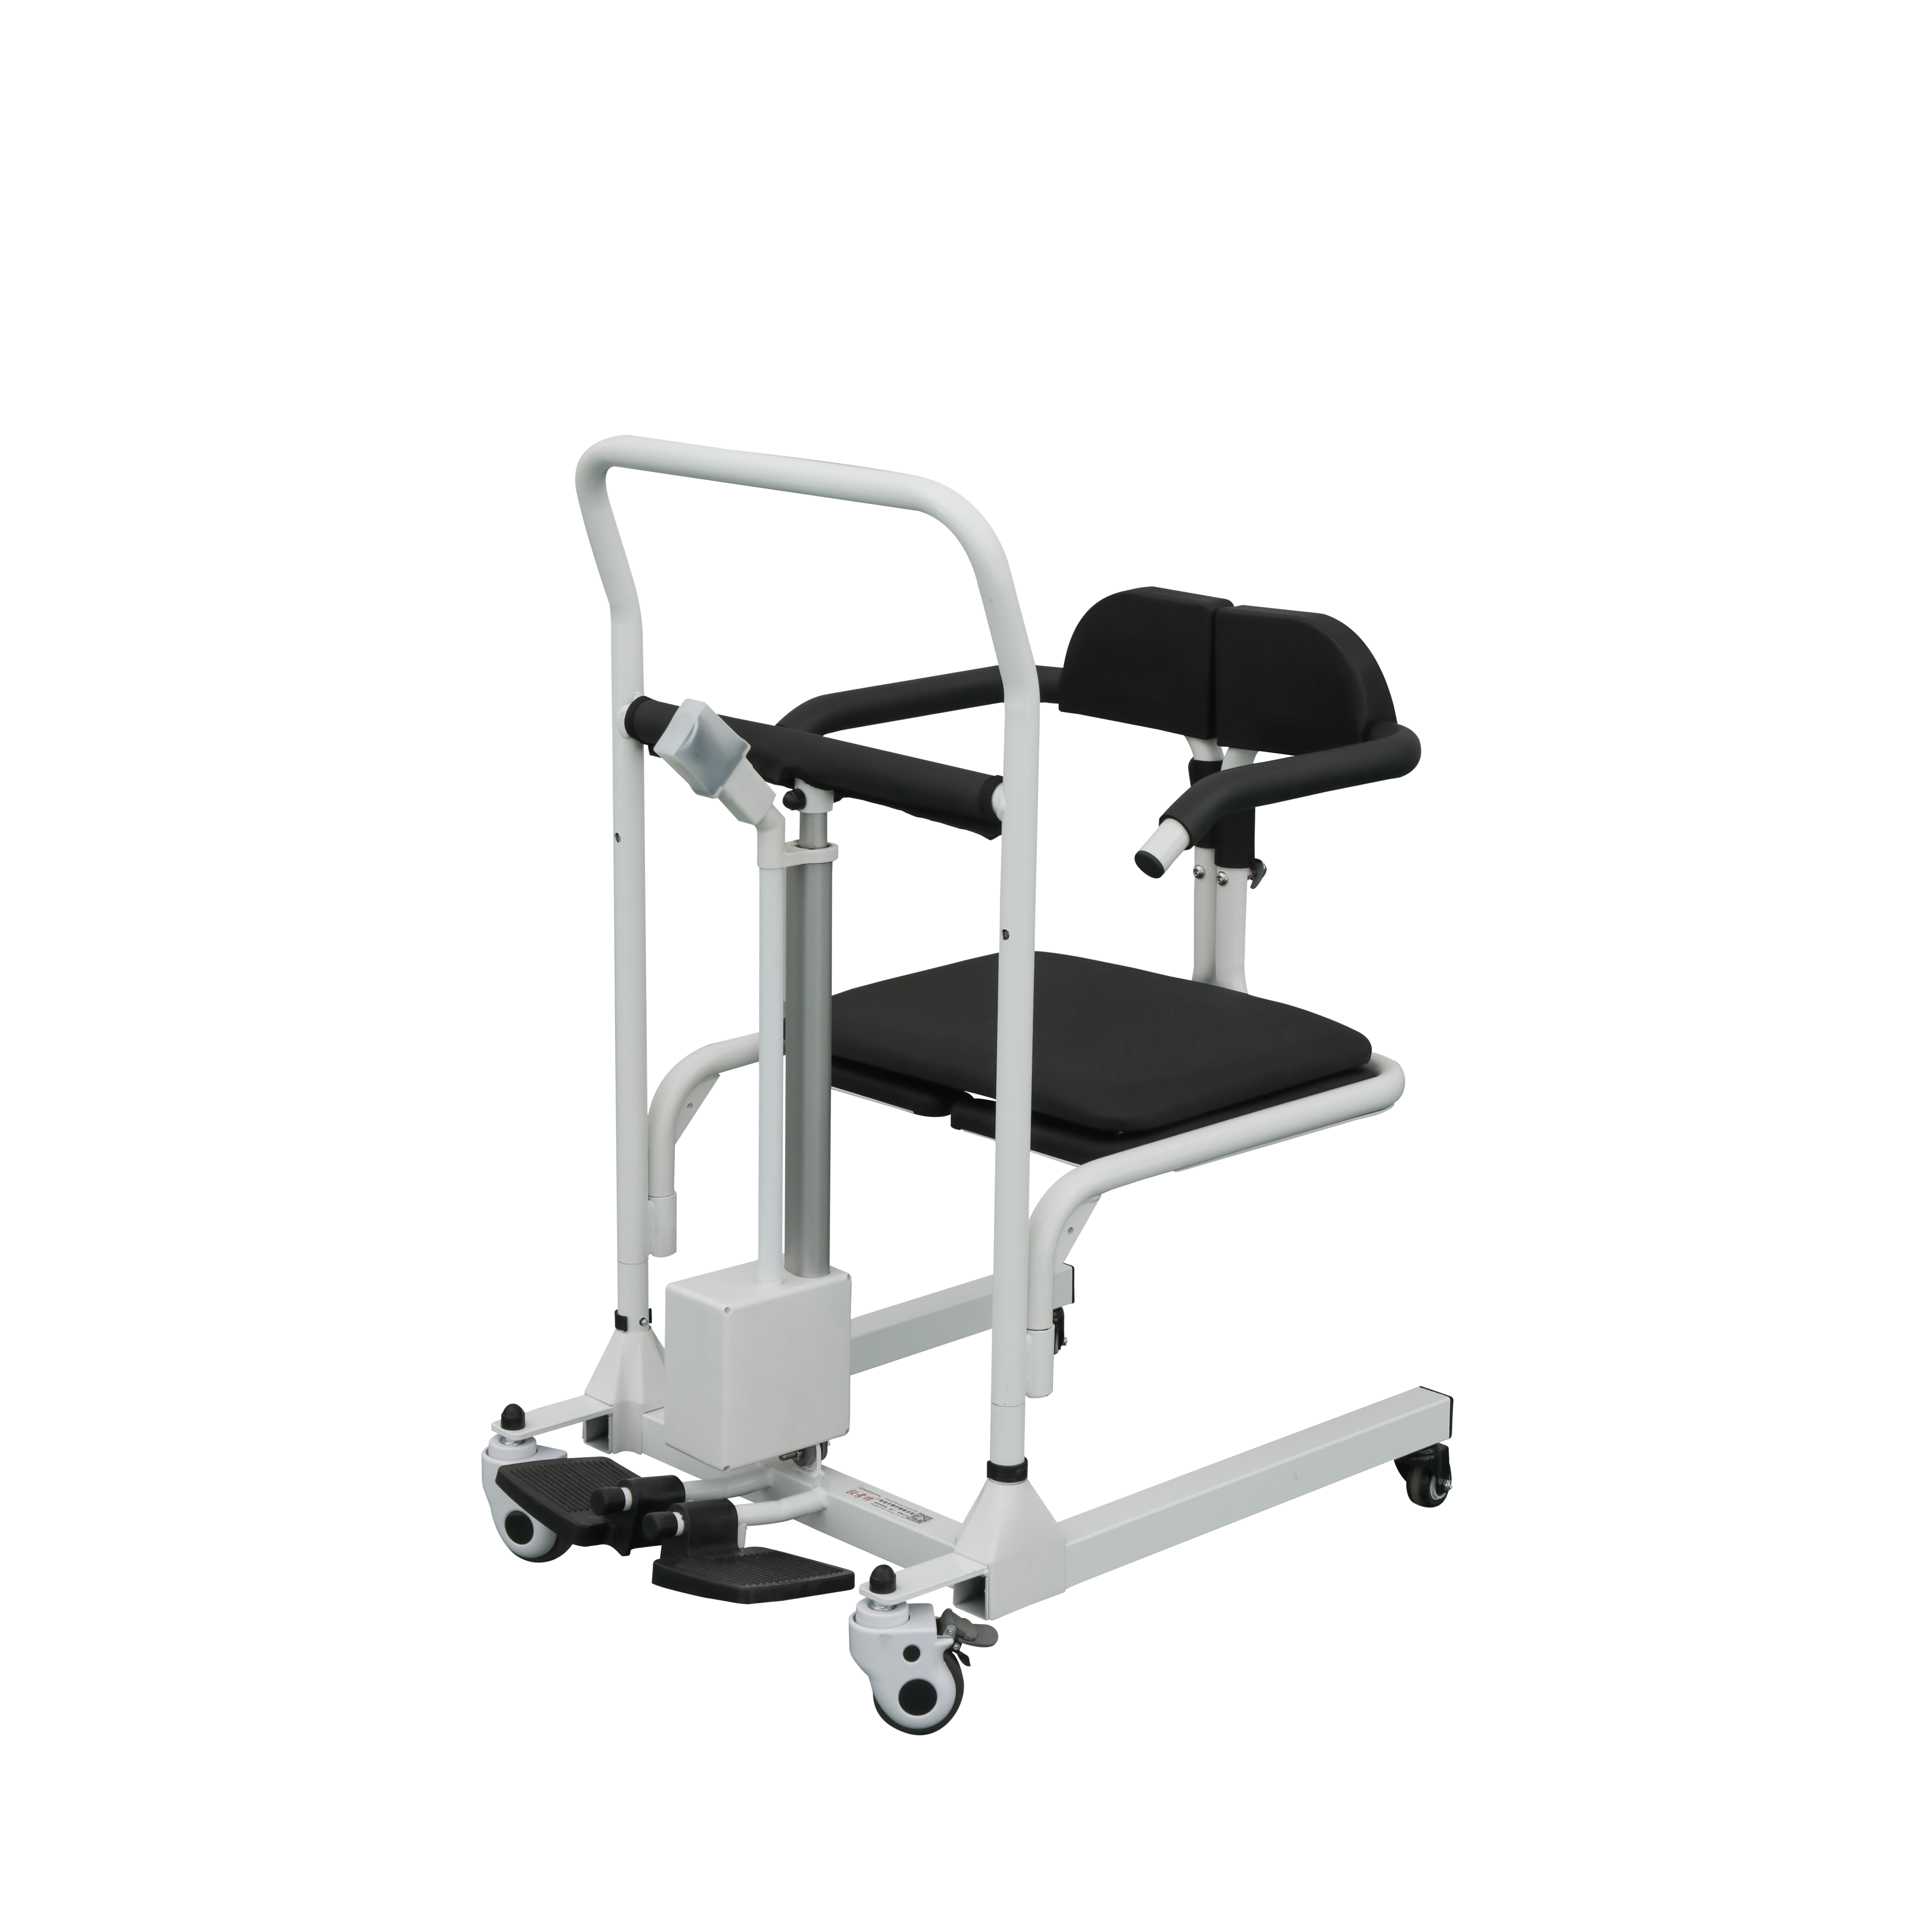 Electric patient lift transfer chair become more and more popular around elderly people